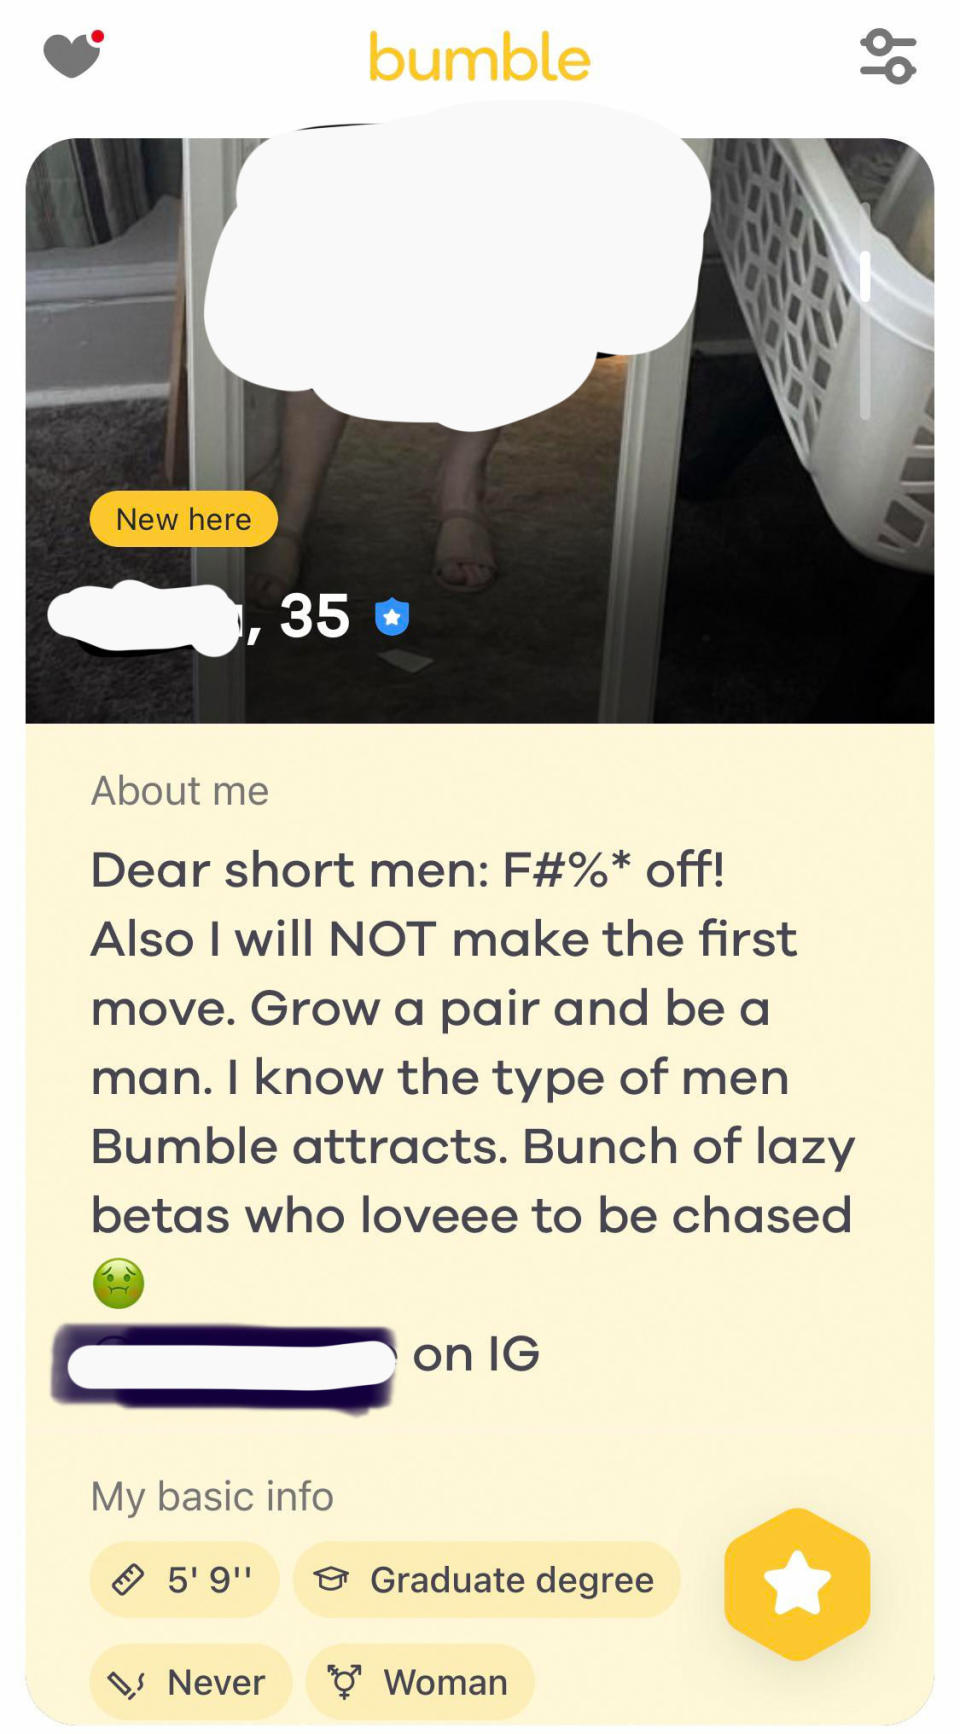 a woman whose profile says for short men to fuck off and that she will not be making the first move, when bumble's whole point is that women make the first move